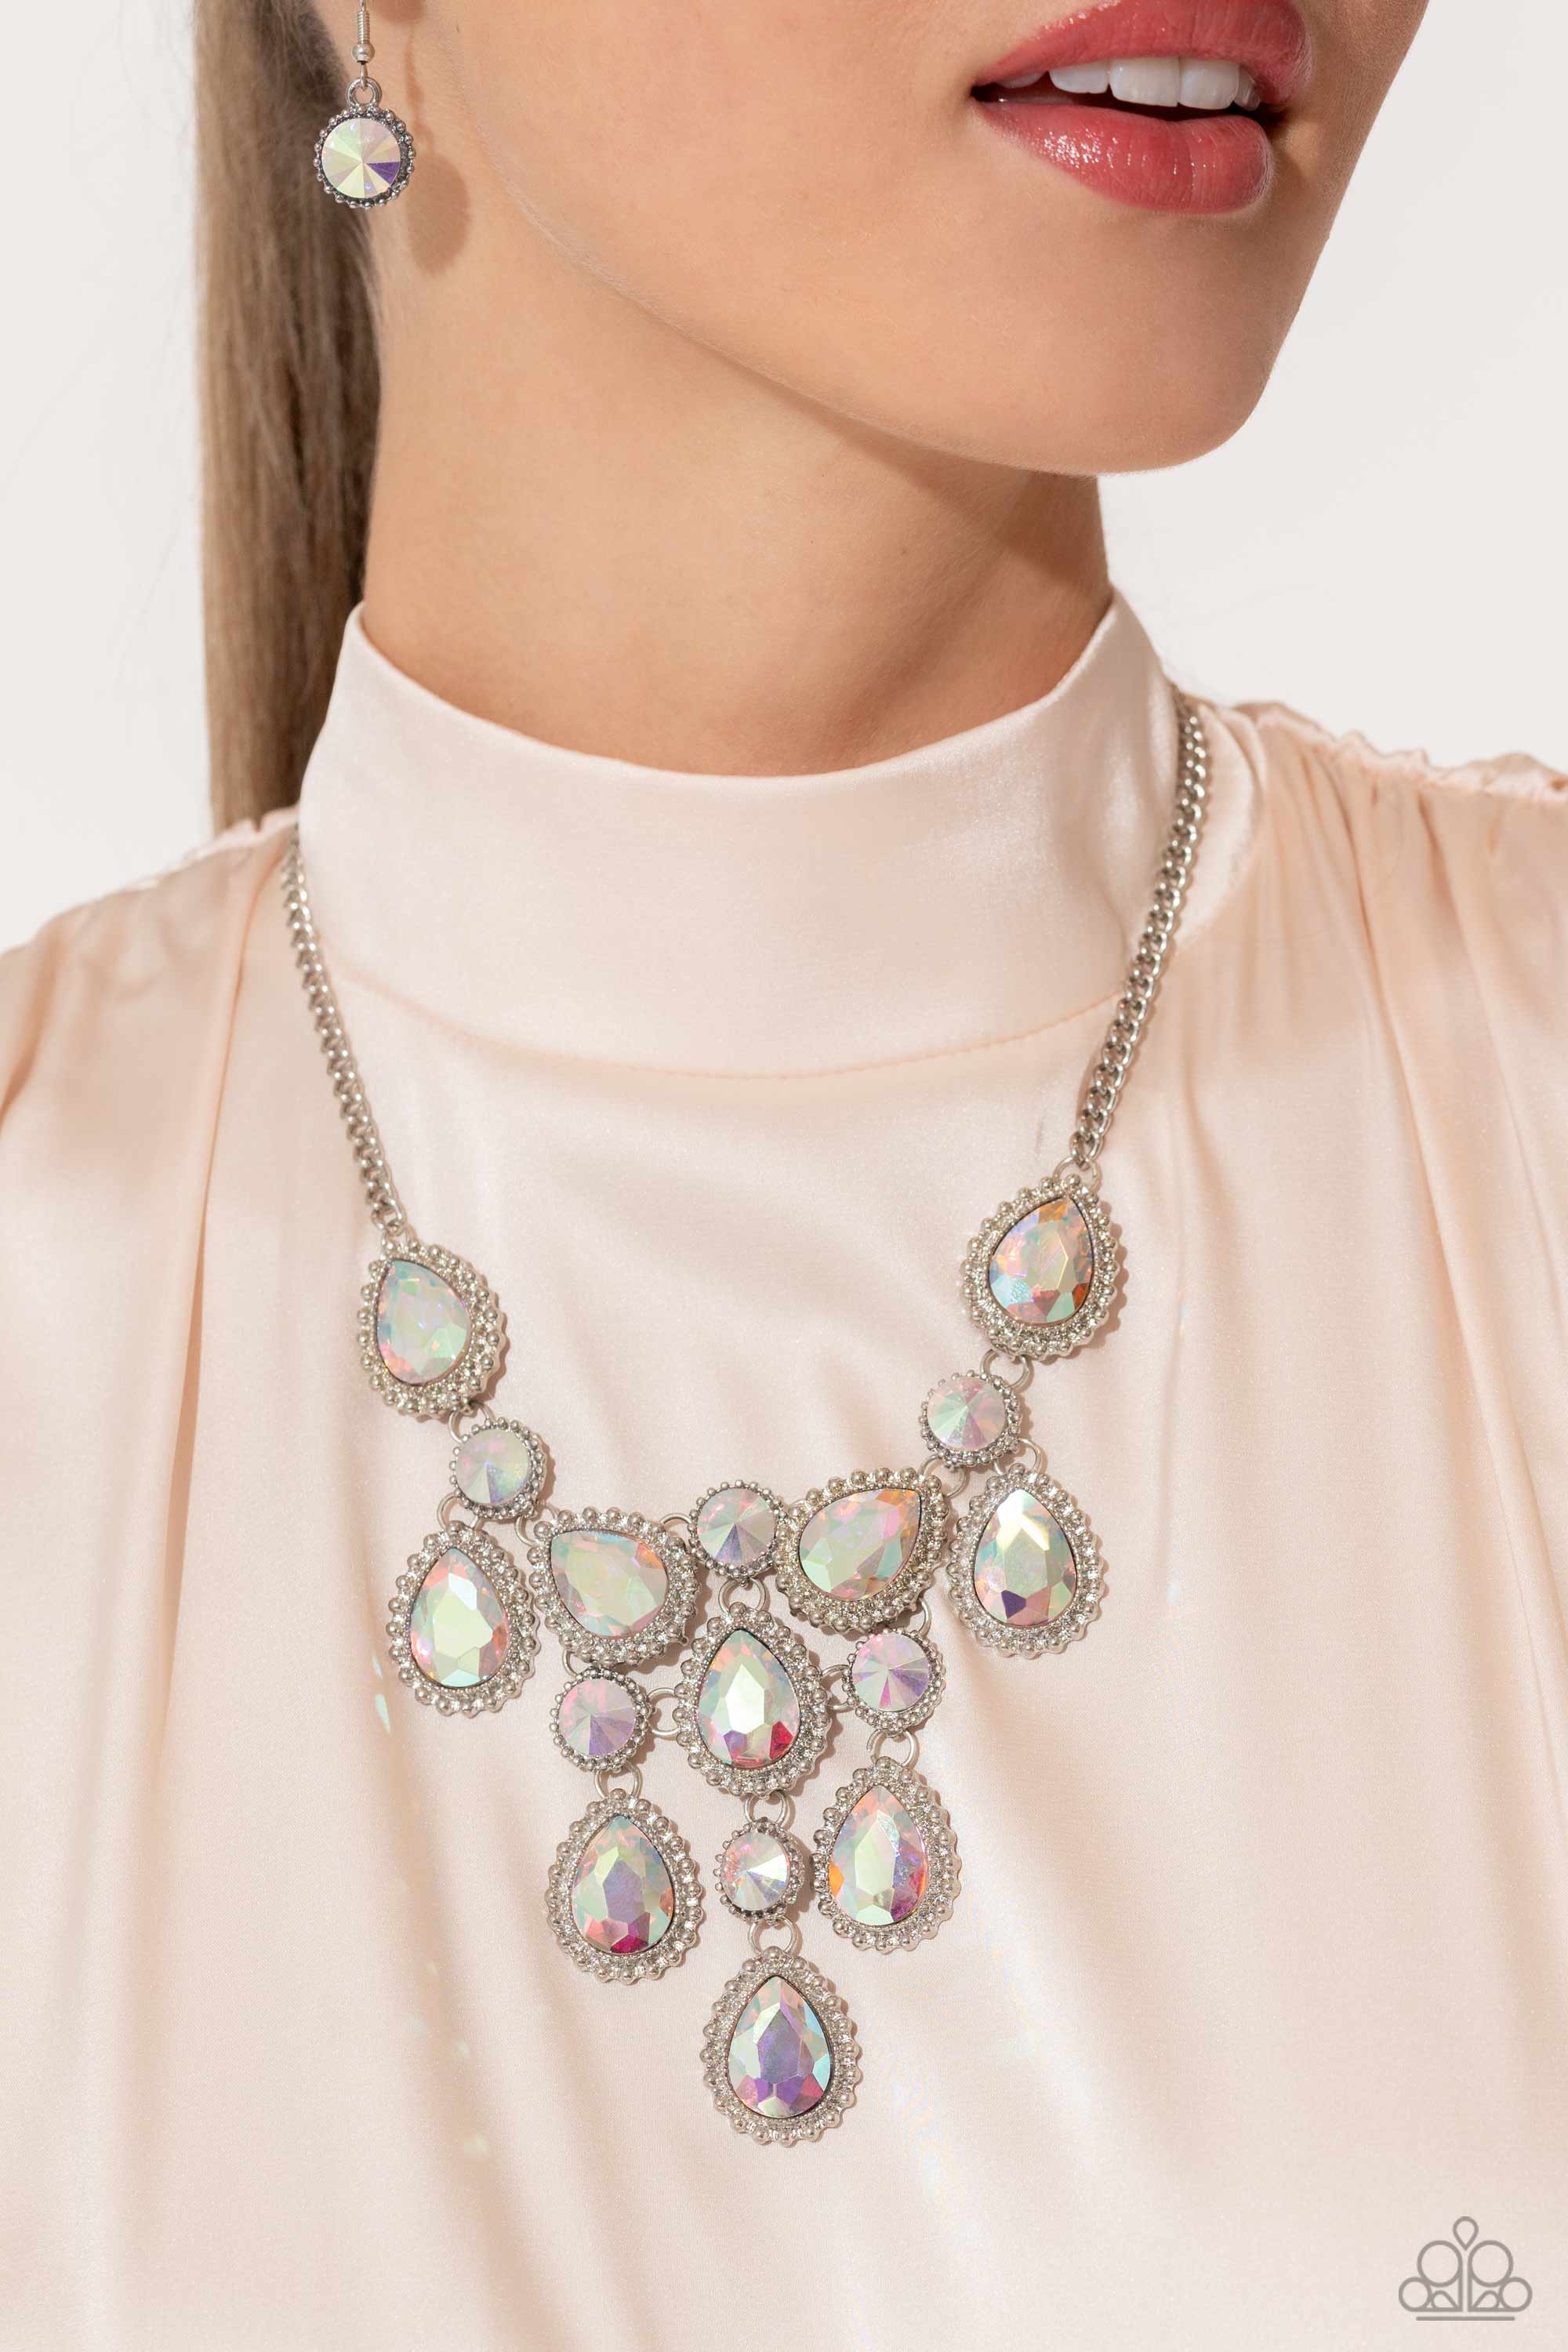 Dripping in Dazzle Multi Iridescent Rhinestone Necklace - Paparazzi Accessories- lightbox - CarasShop.com - $5 Jewelry by Cara Jewels